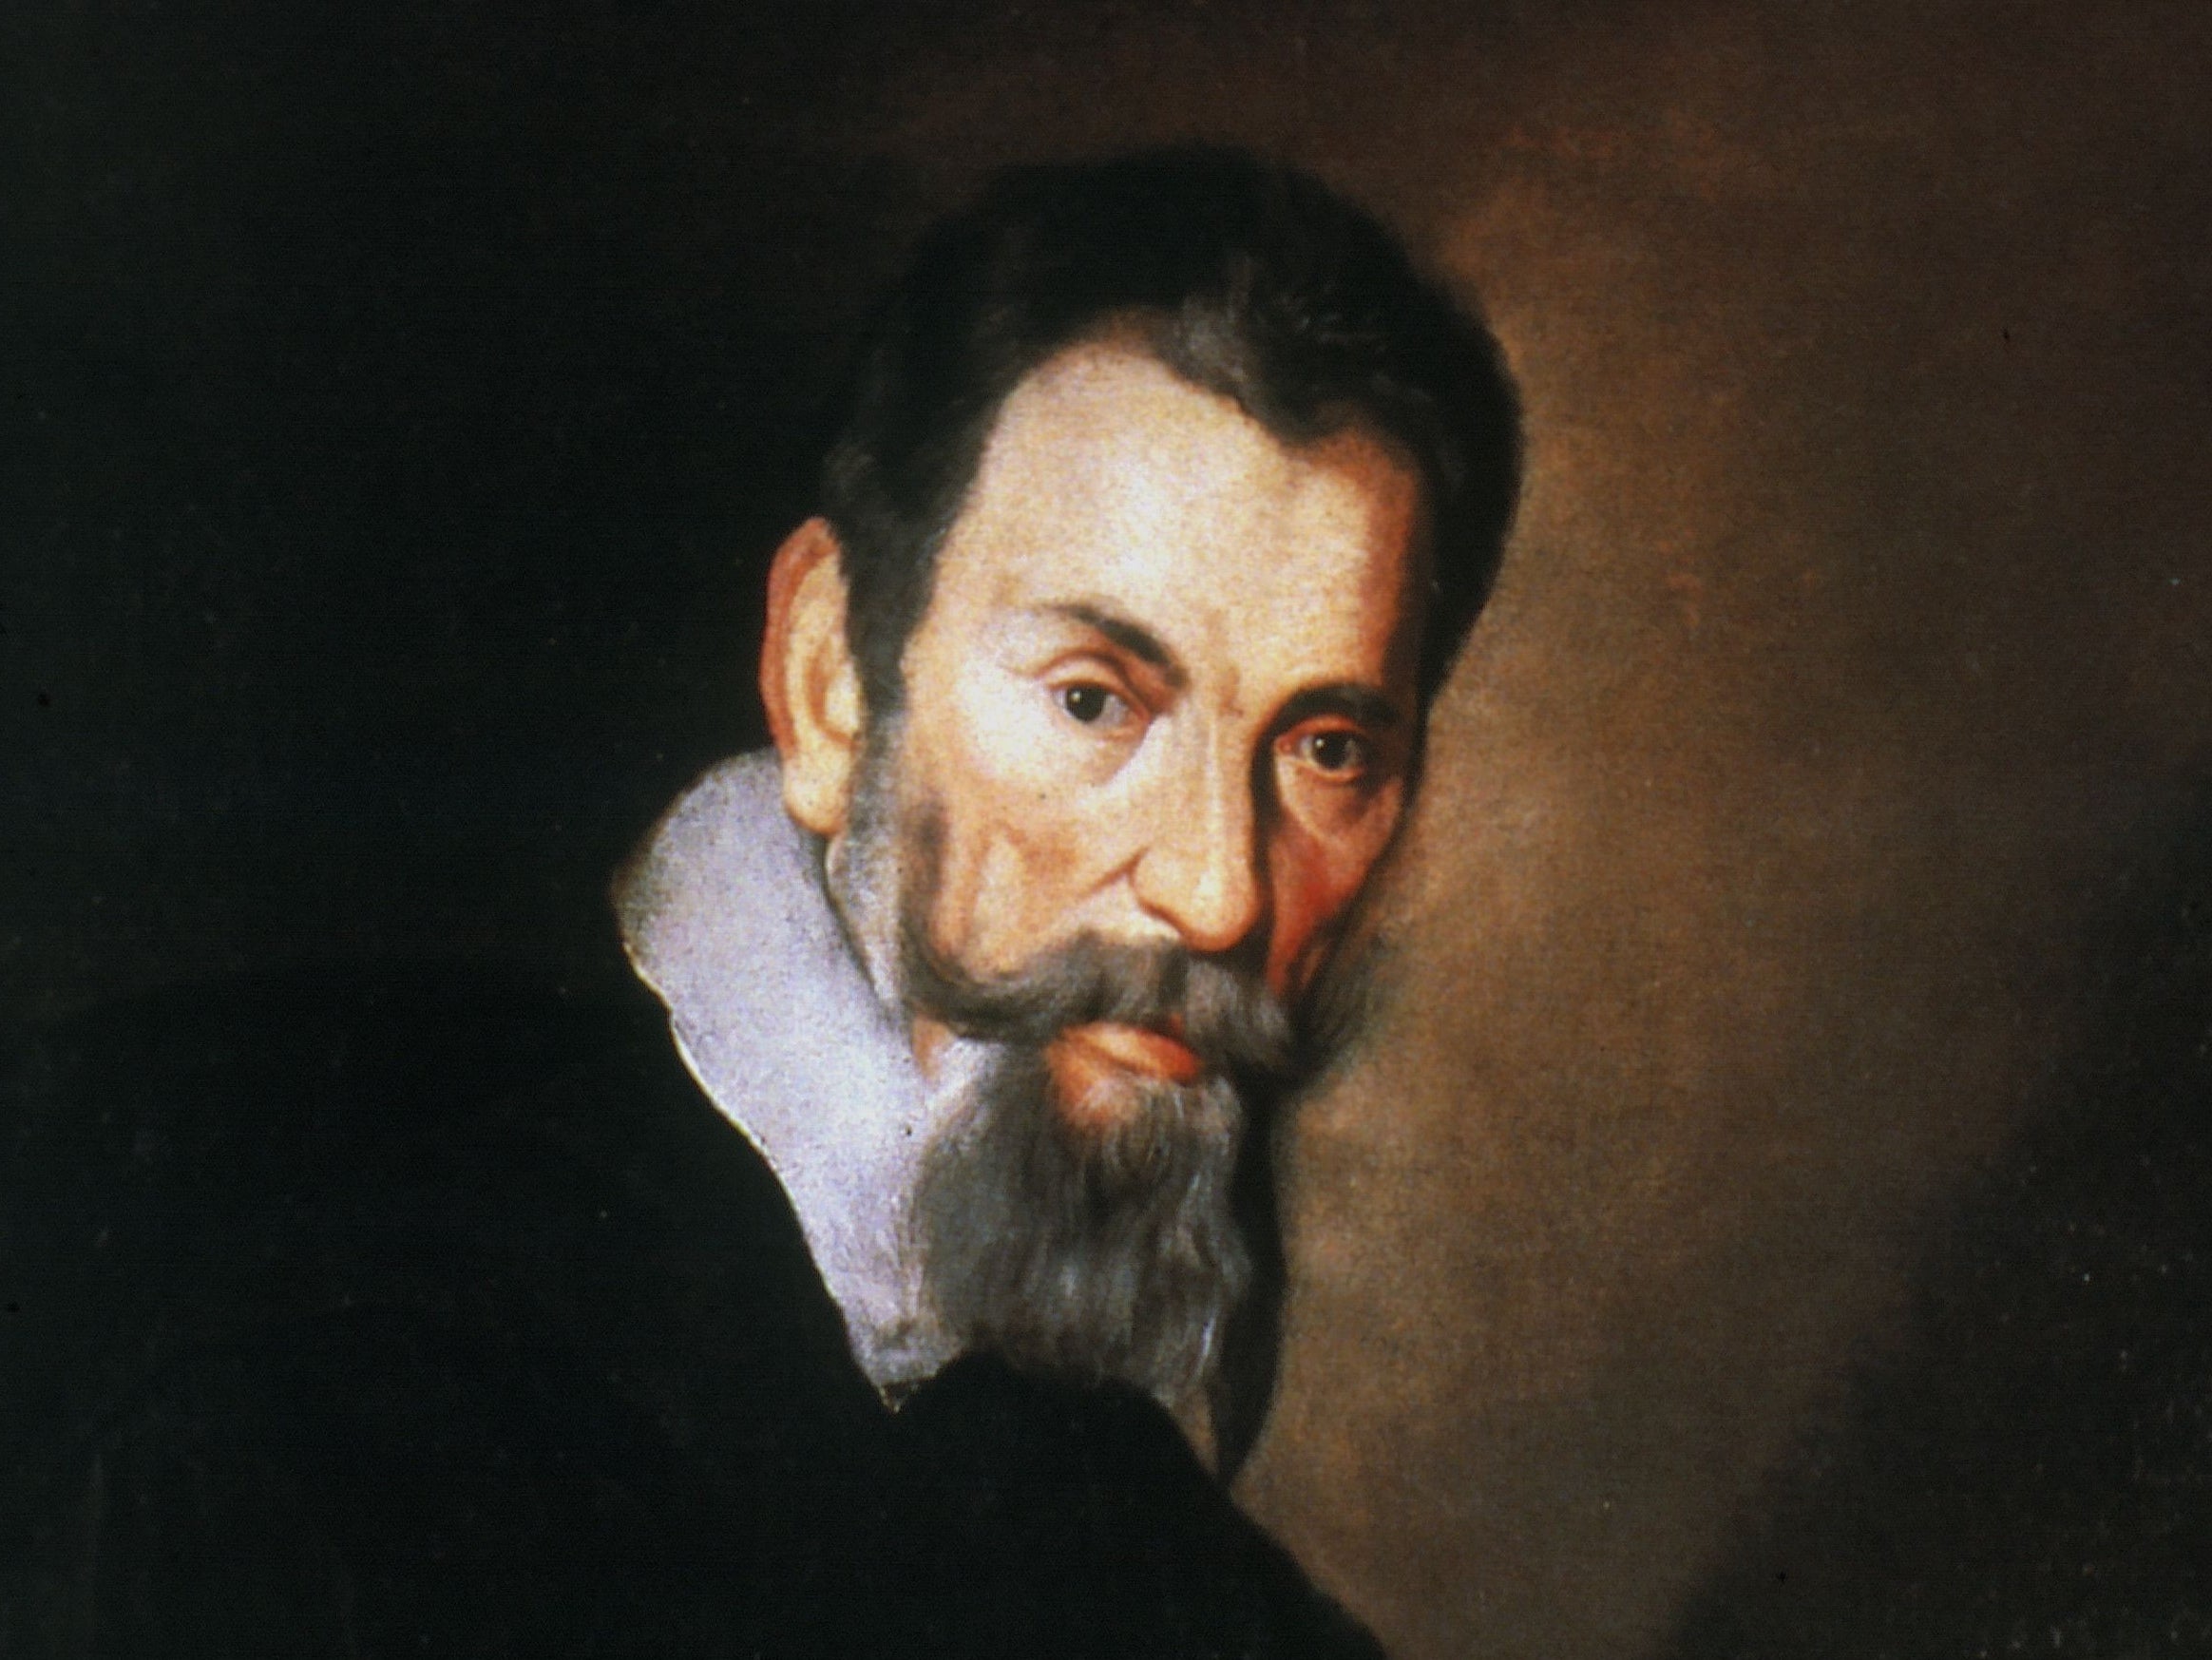 Monteverdi’s madrigals performed by Concerto Italiano are musical settings of Renaissance Italian poetry